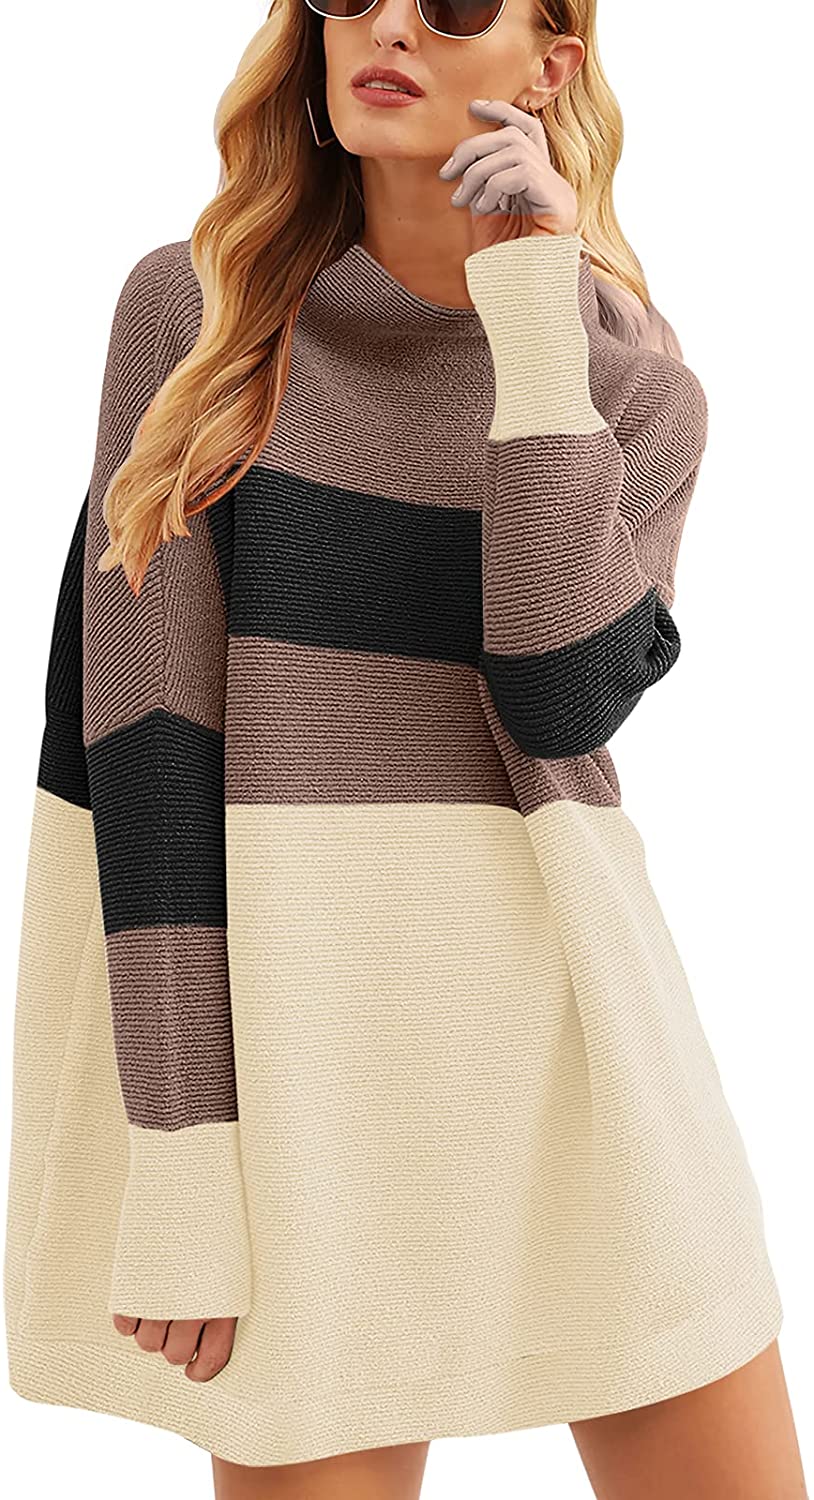 Prinbara Women's Loose Oversize Turtleneck Long Sleeve Ribbed Knit Pullover  Sweater Dress Apricot 2PA40-xingse-XS at  Women's Clothing store